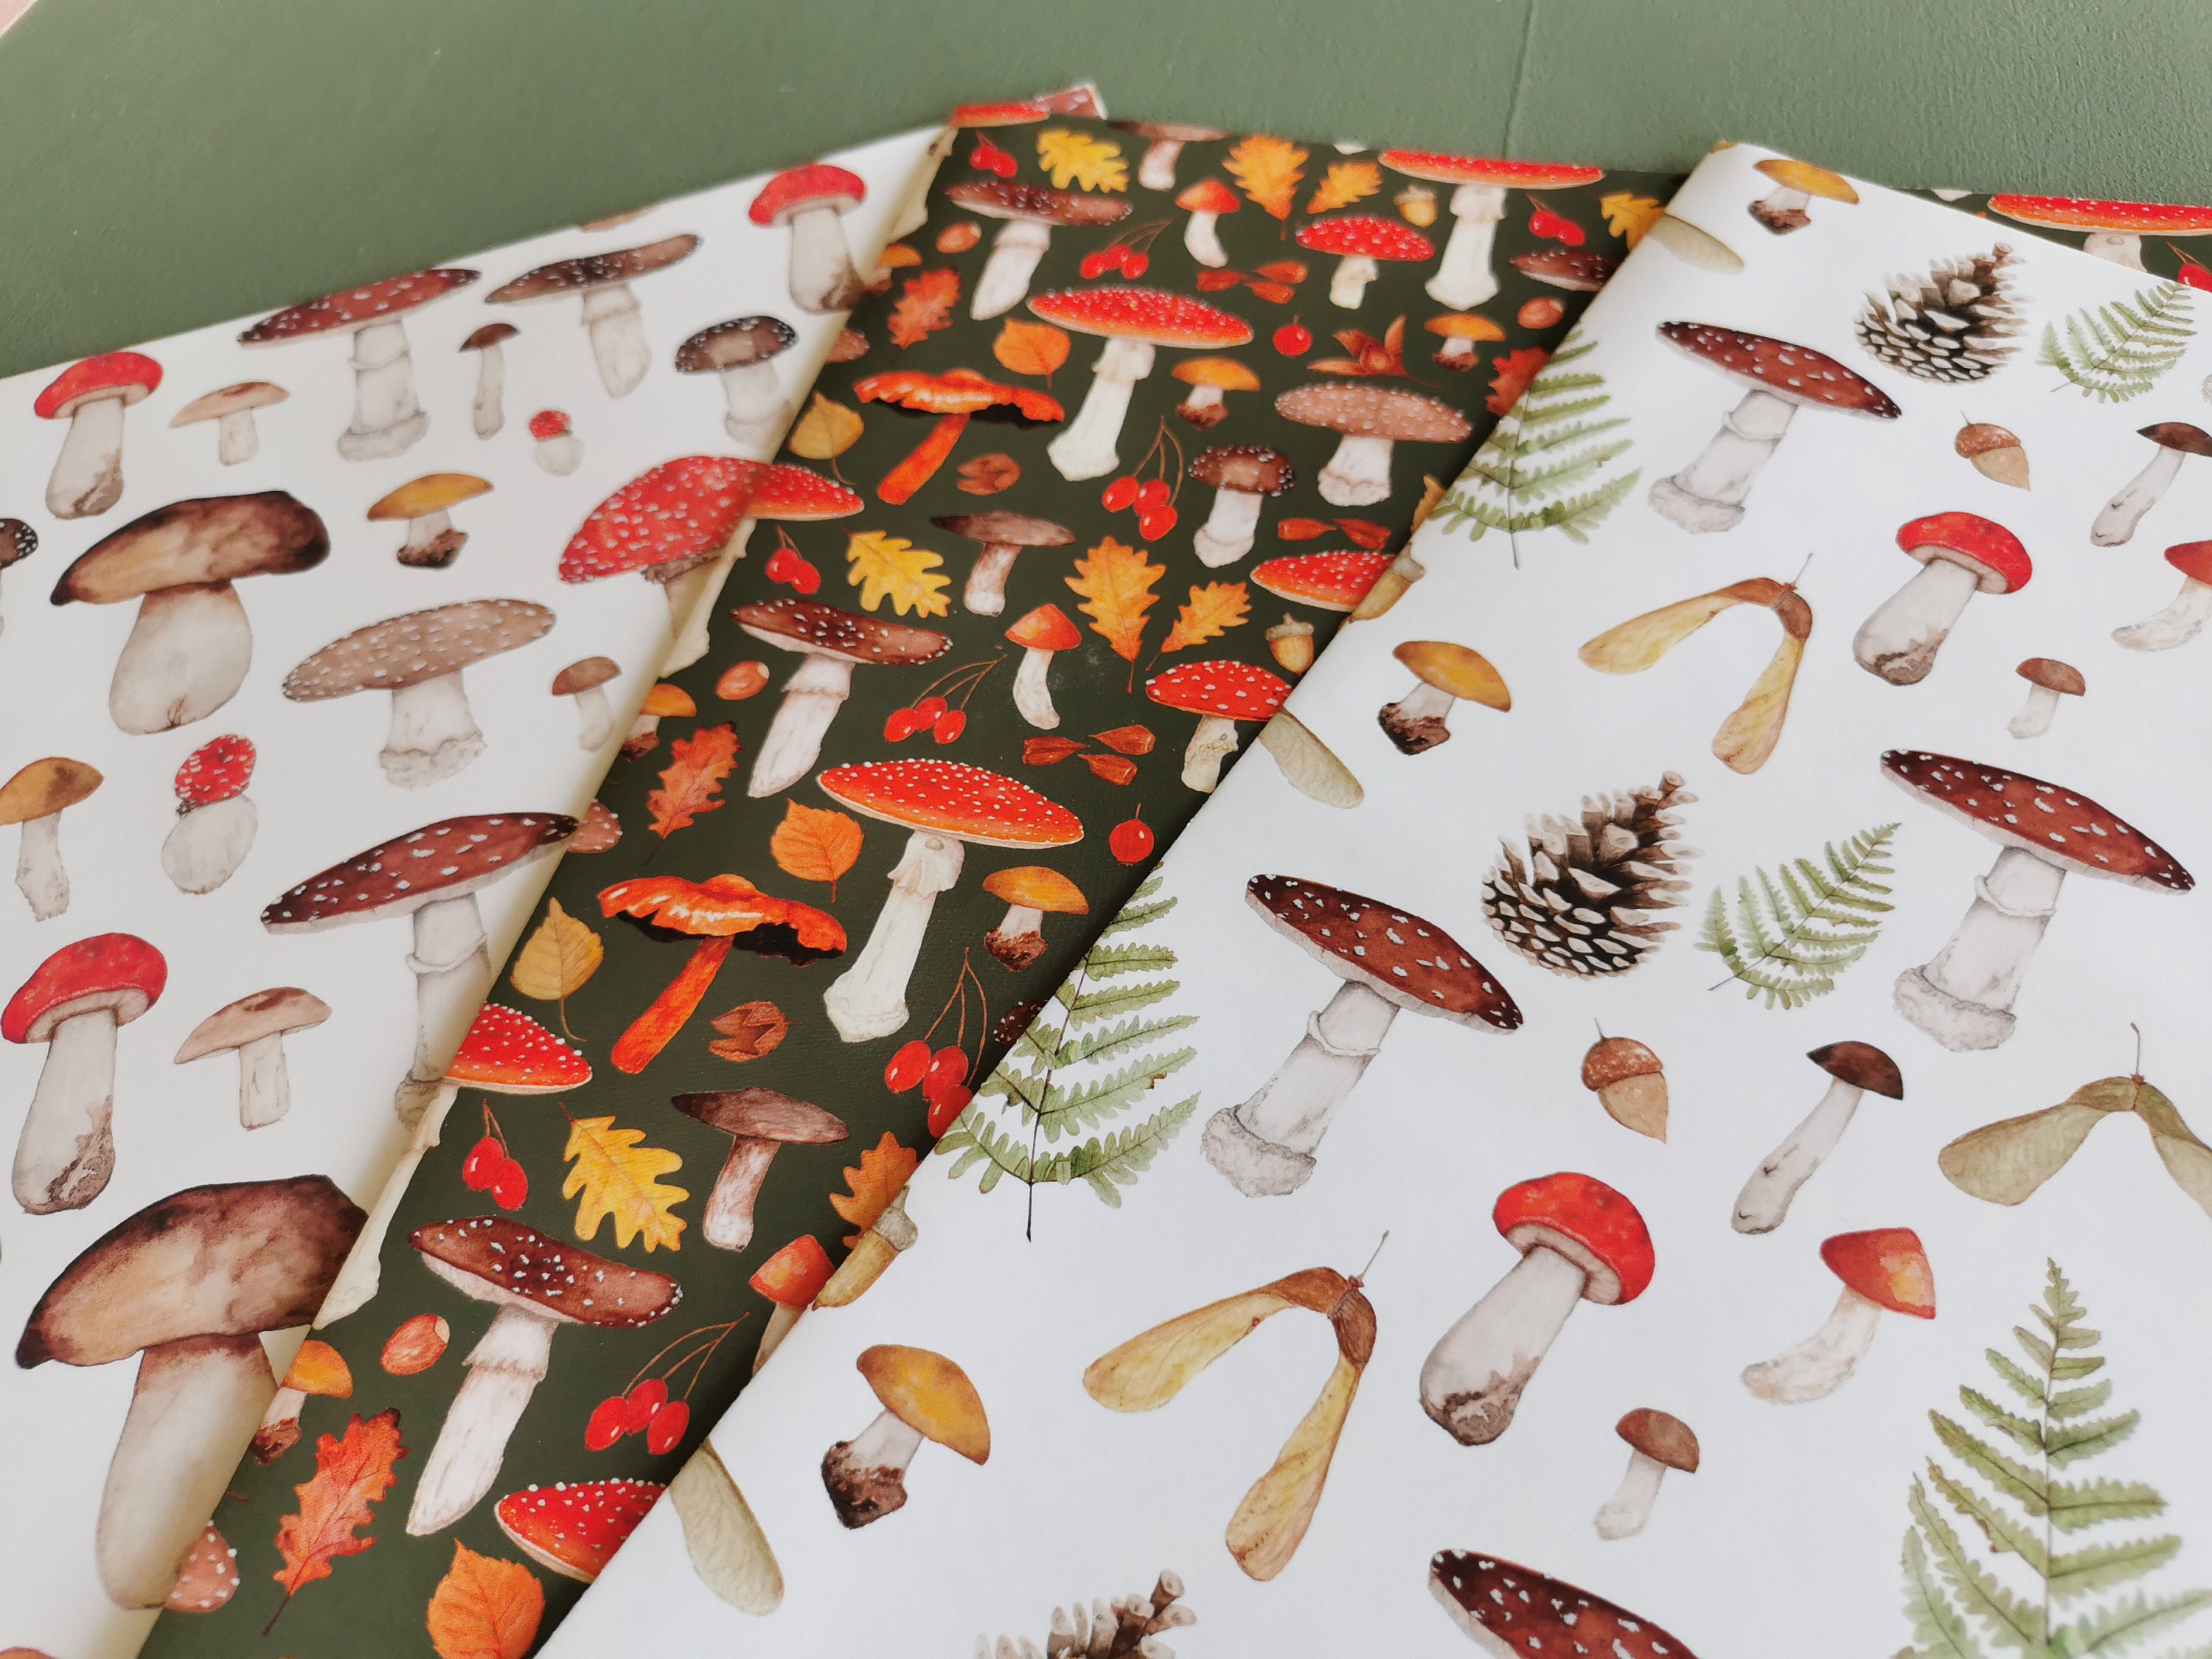 Blue Mushroom Wrapping Paper, Fungi Gift Wrap With Cute Mushrooms Design, Nature Foraging Woodland Mushroom Collection, FOLDED Sheet Wrap, Making  Meadows Ltd